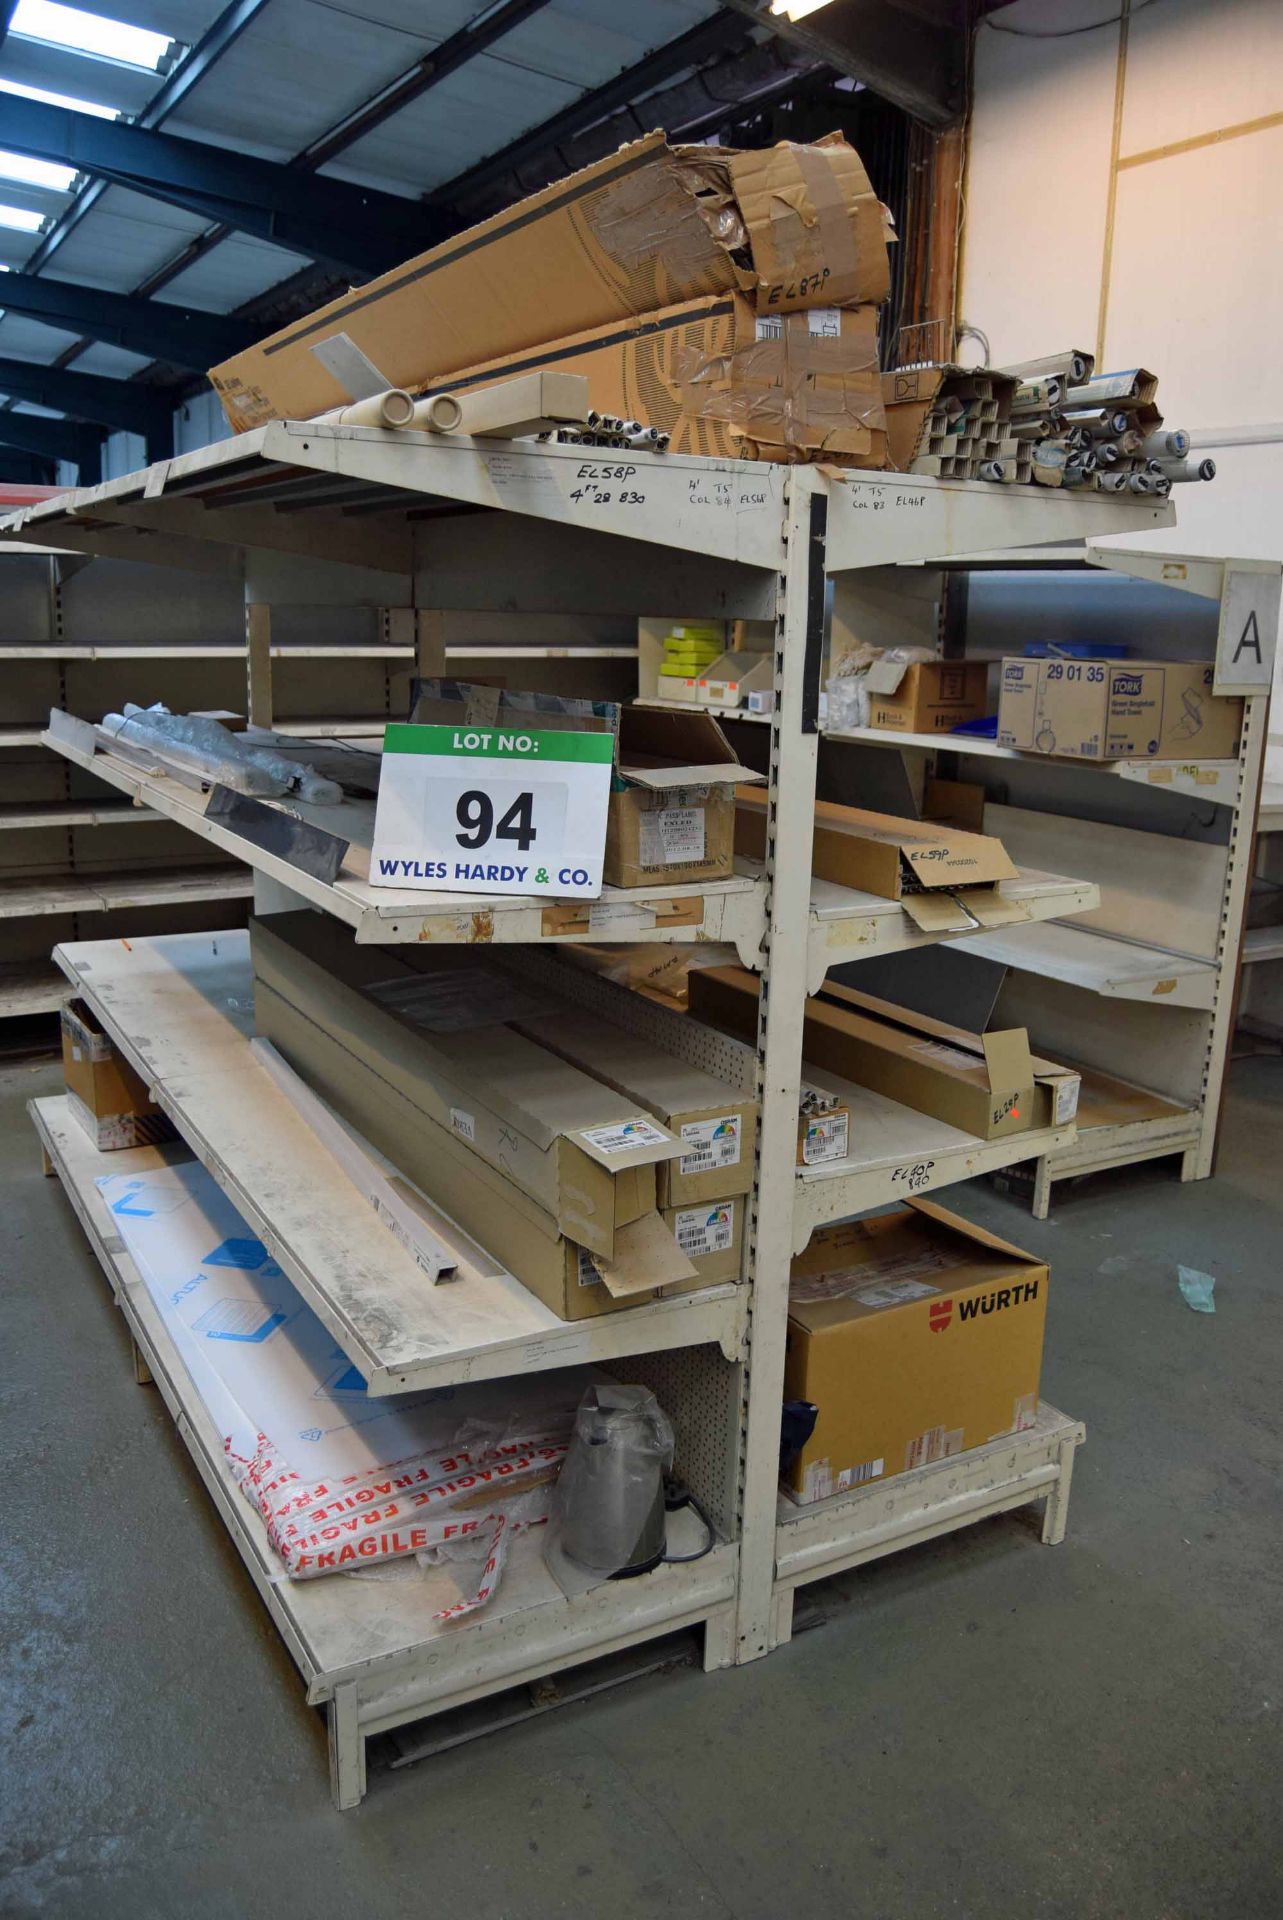 The Contents of the Gondola Shelving including LED/Fluorescent Lighting and Chiller Dividers (As